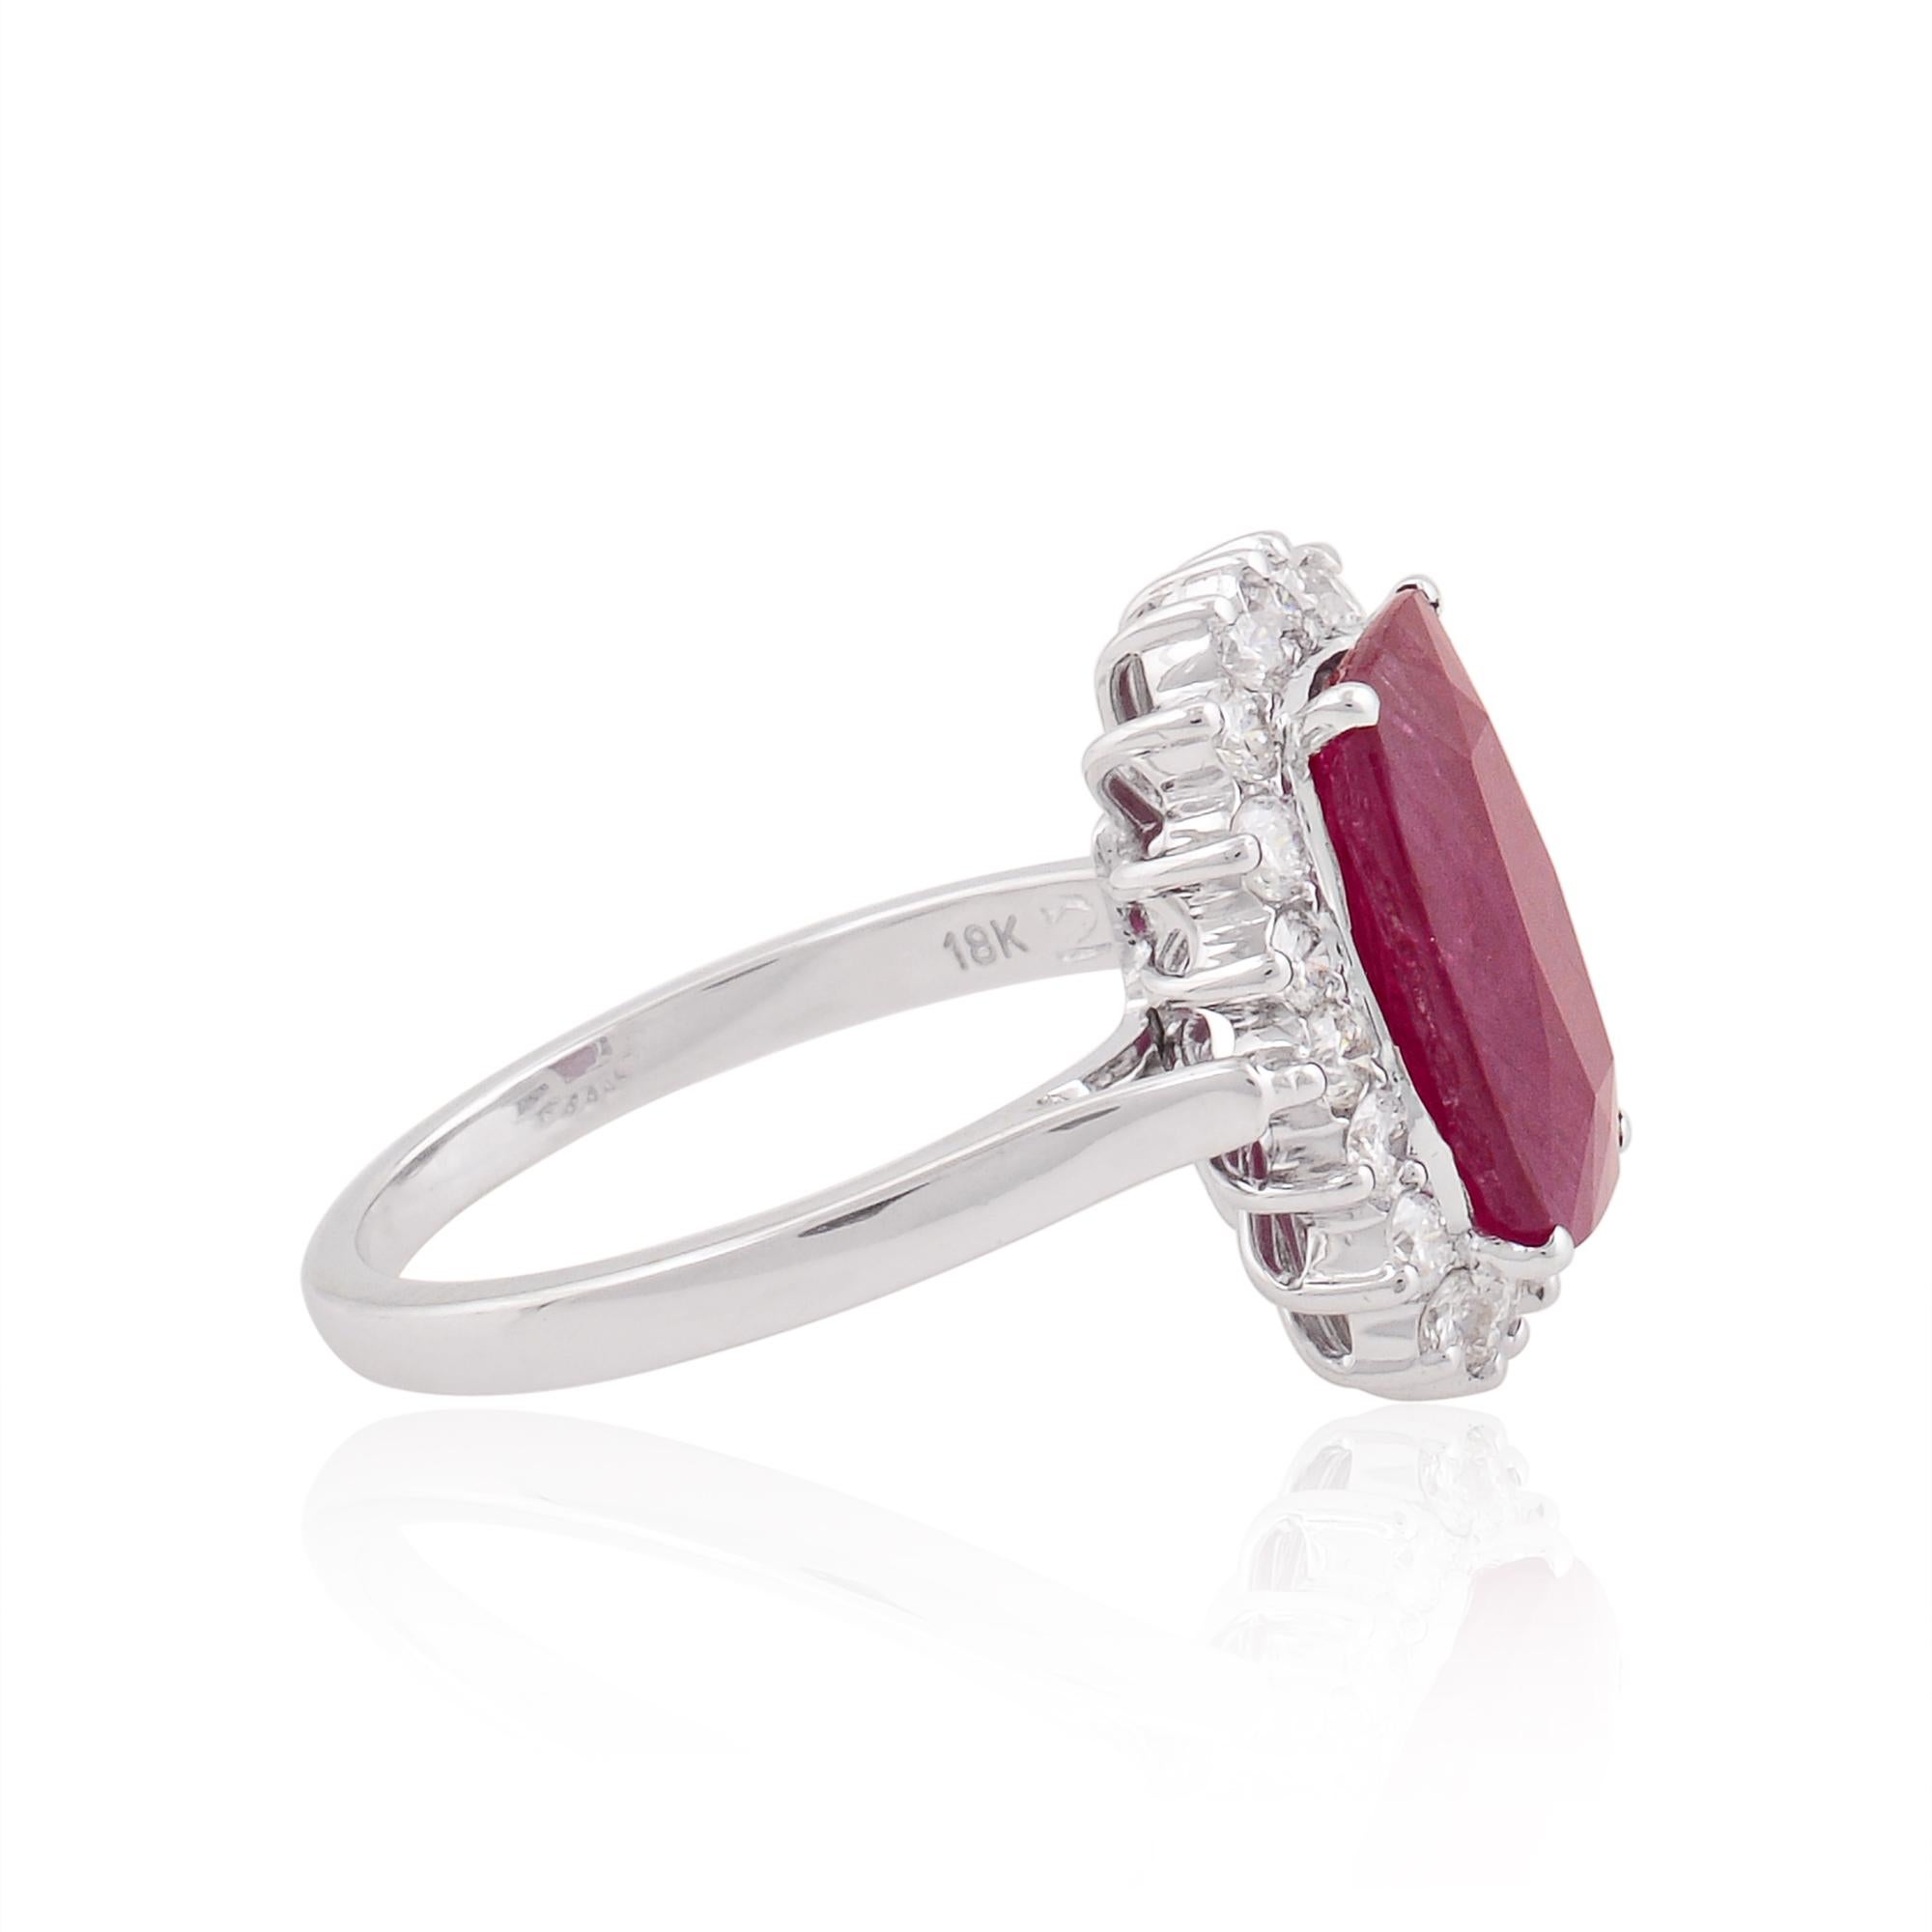 For Sale:  Ruby Gemstone Cocktail Ring Diamond Pave 18k White Gold Handmade Fine Jewelry 2